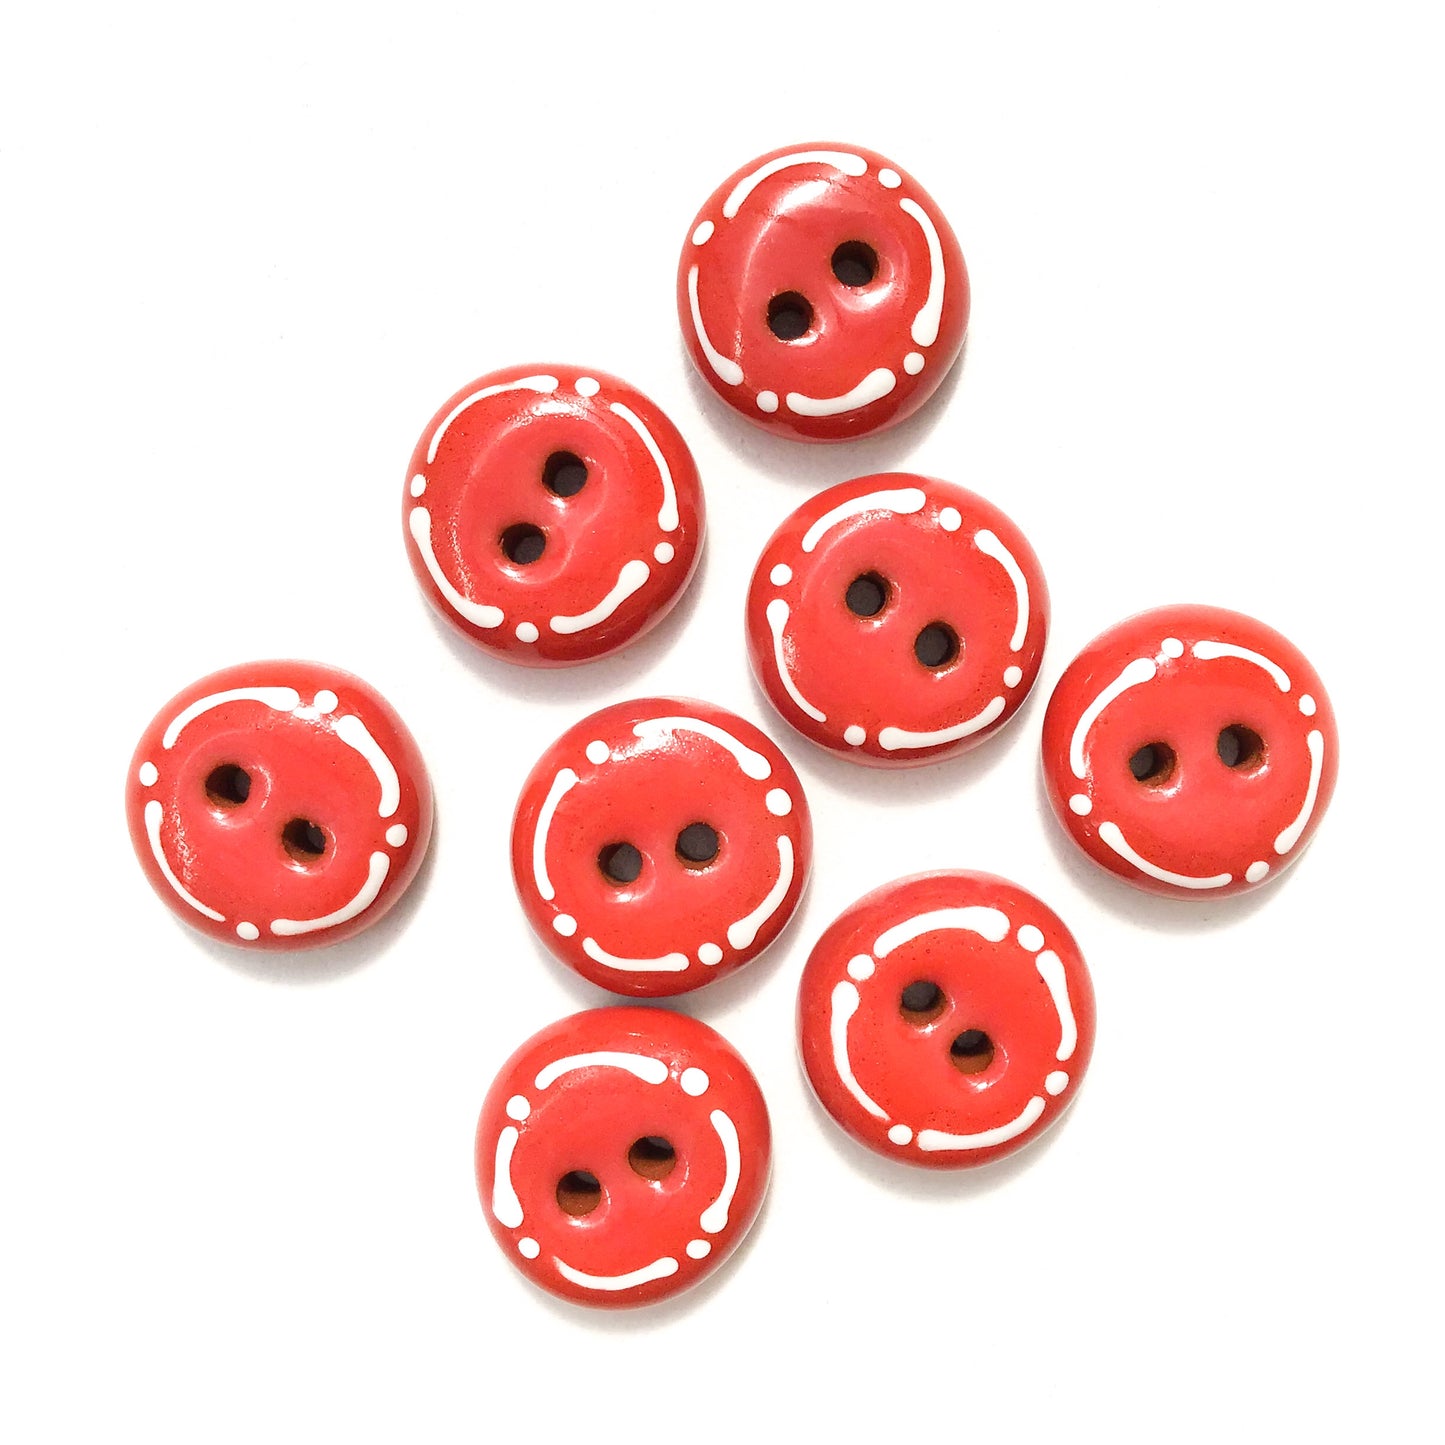 Deep Orange-Red Ceramic Buttons - Rounded Ceramic Buttons - 9/16" - 8 Pack